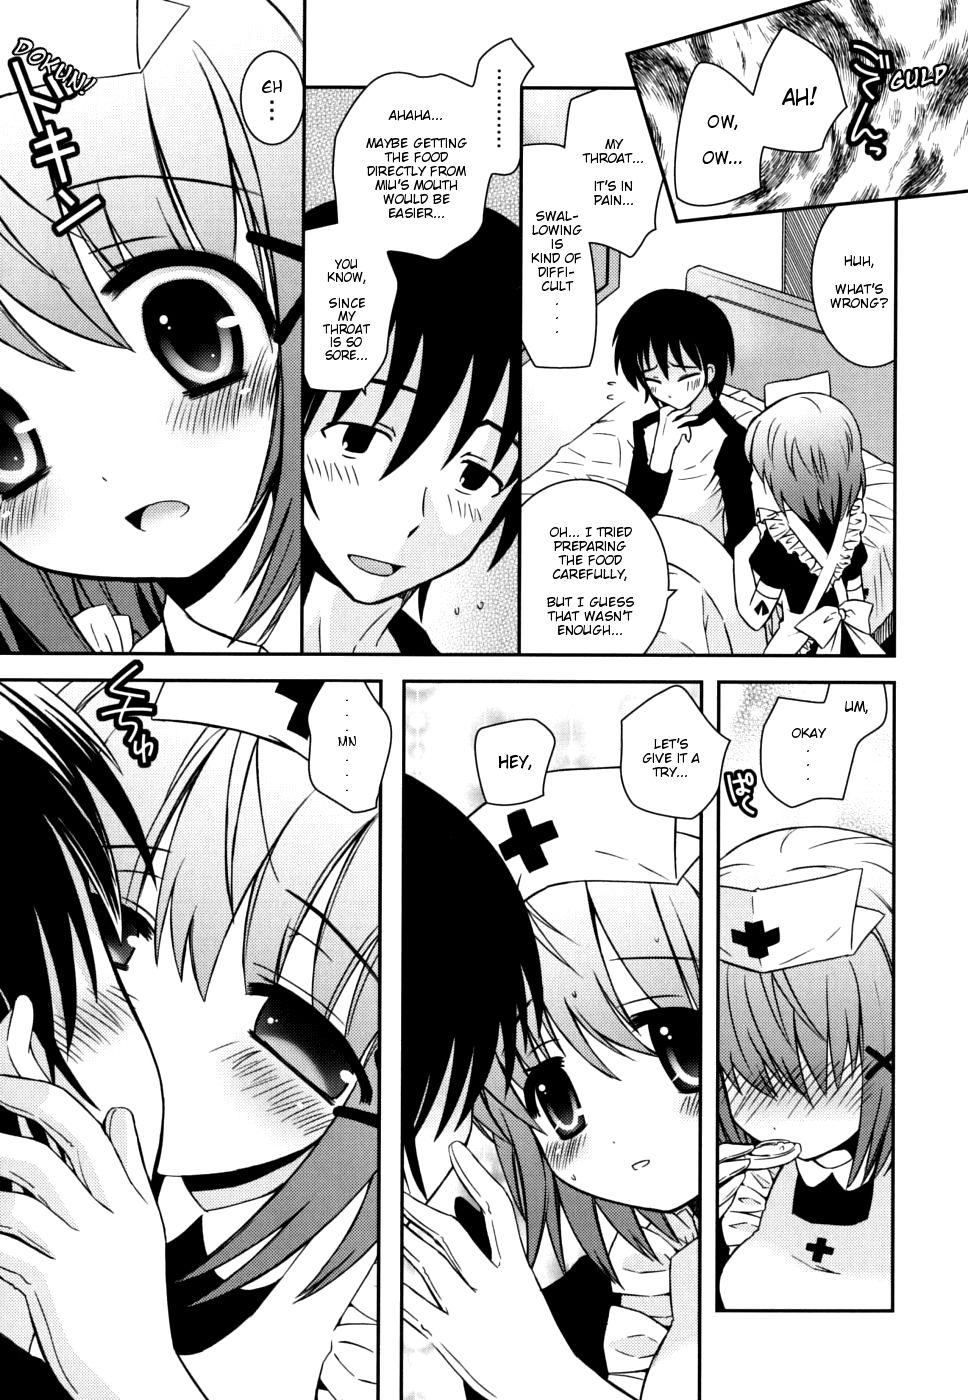 Groping Imouto Pandemic! - Younger sister Pandemic Dominicana - Page 5